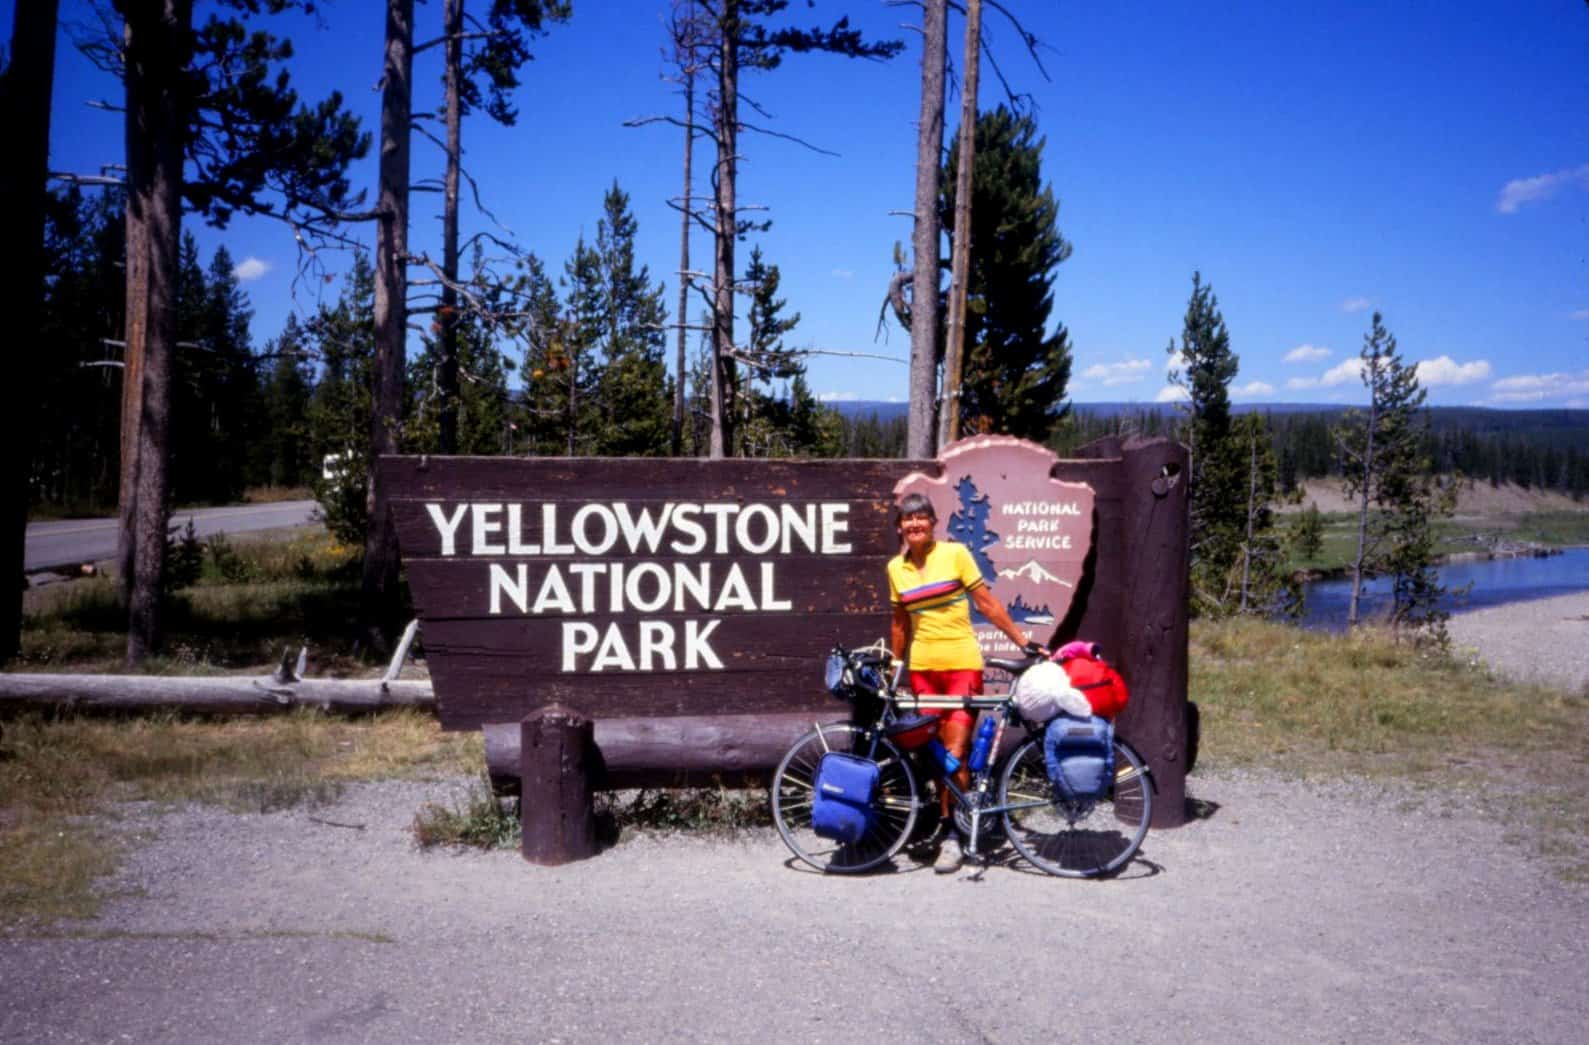 entering Yellowstone National Park